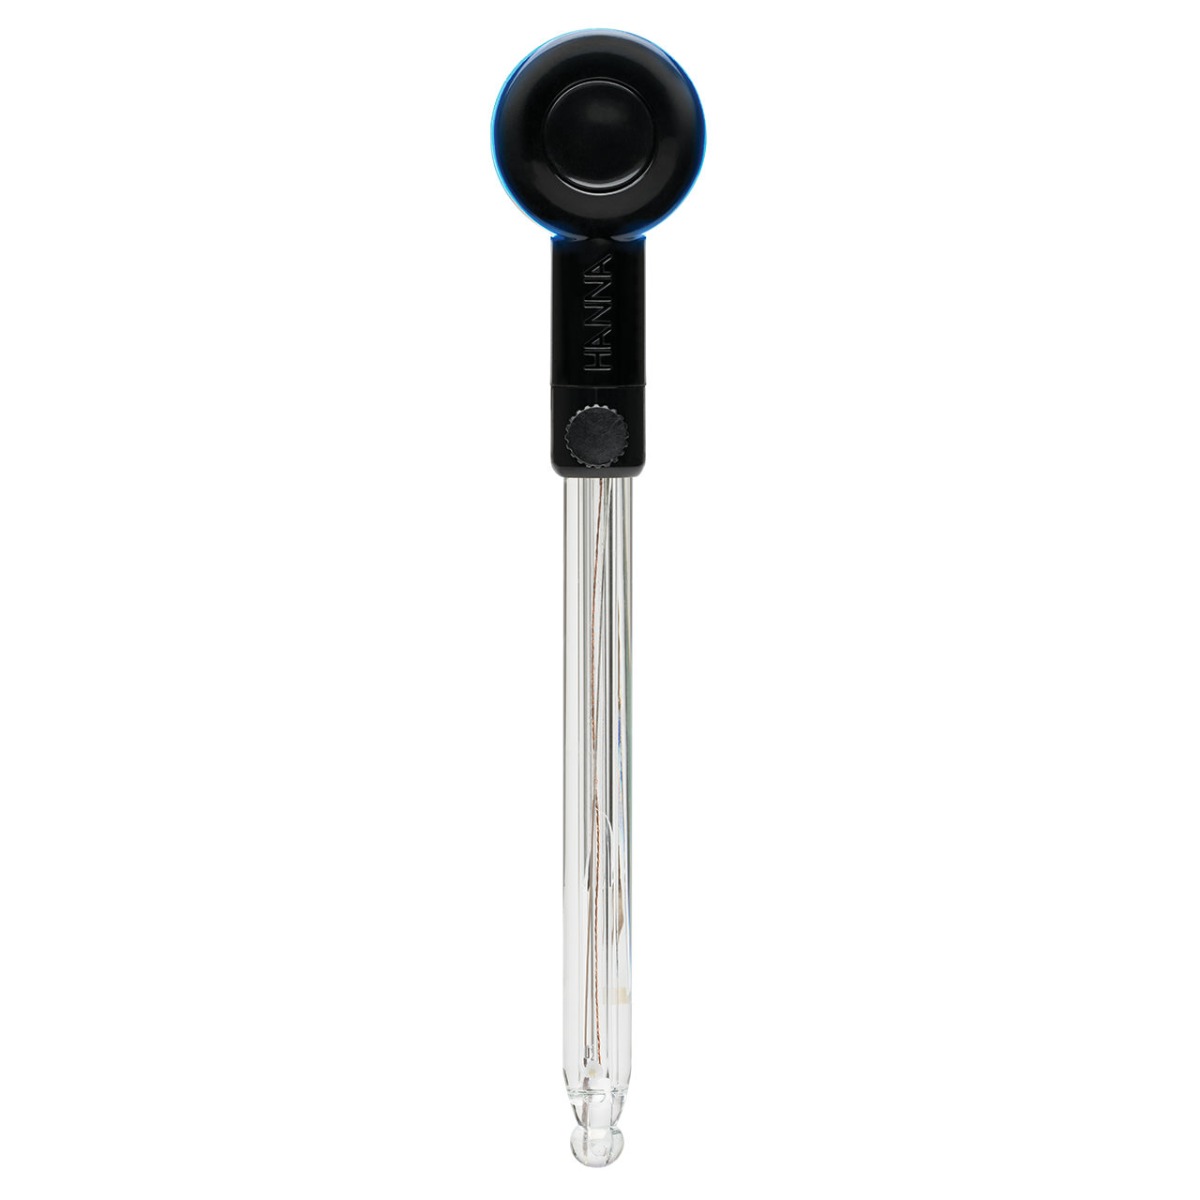 HALO® pH Electrode  with Bluetooth® Smart Technology